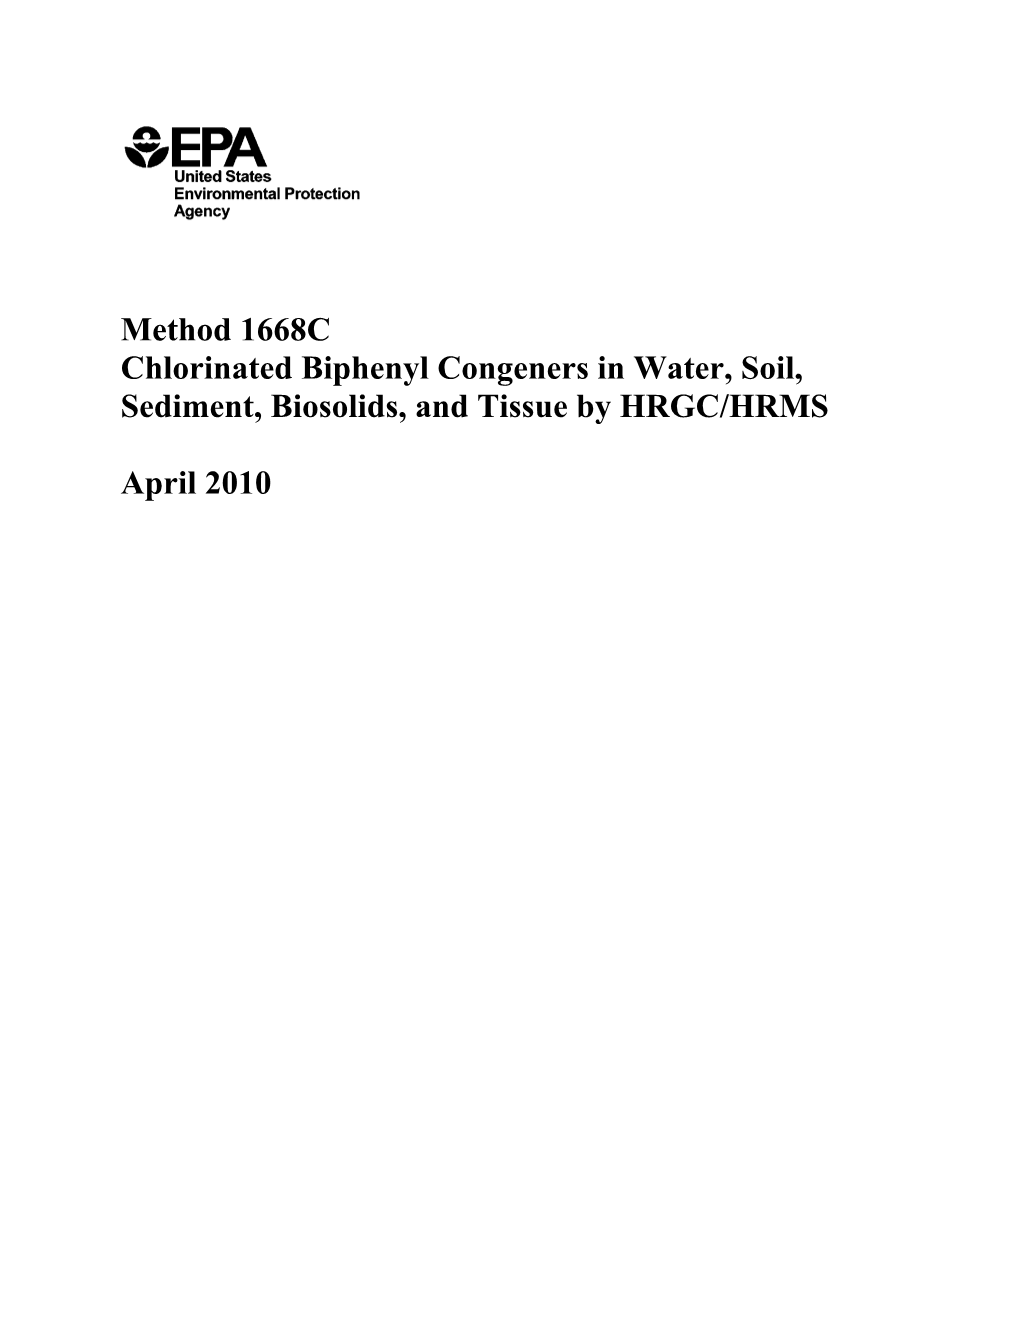 Method 1668C: Chlorinated Biphenyl Congeners in Water, Soil, Sediment, Biosolids, and Tissue by HRGC/HRMS